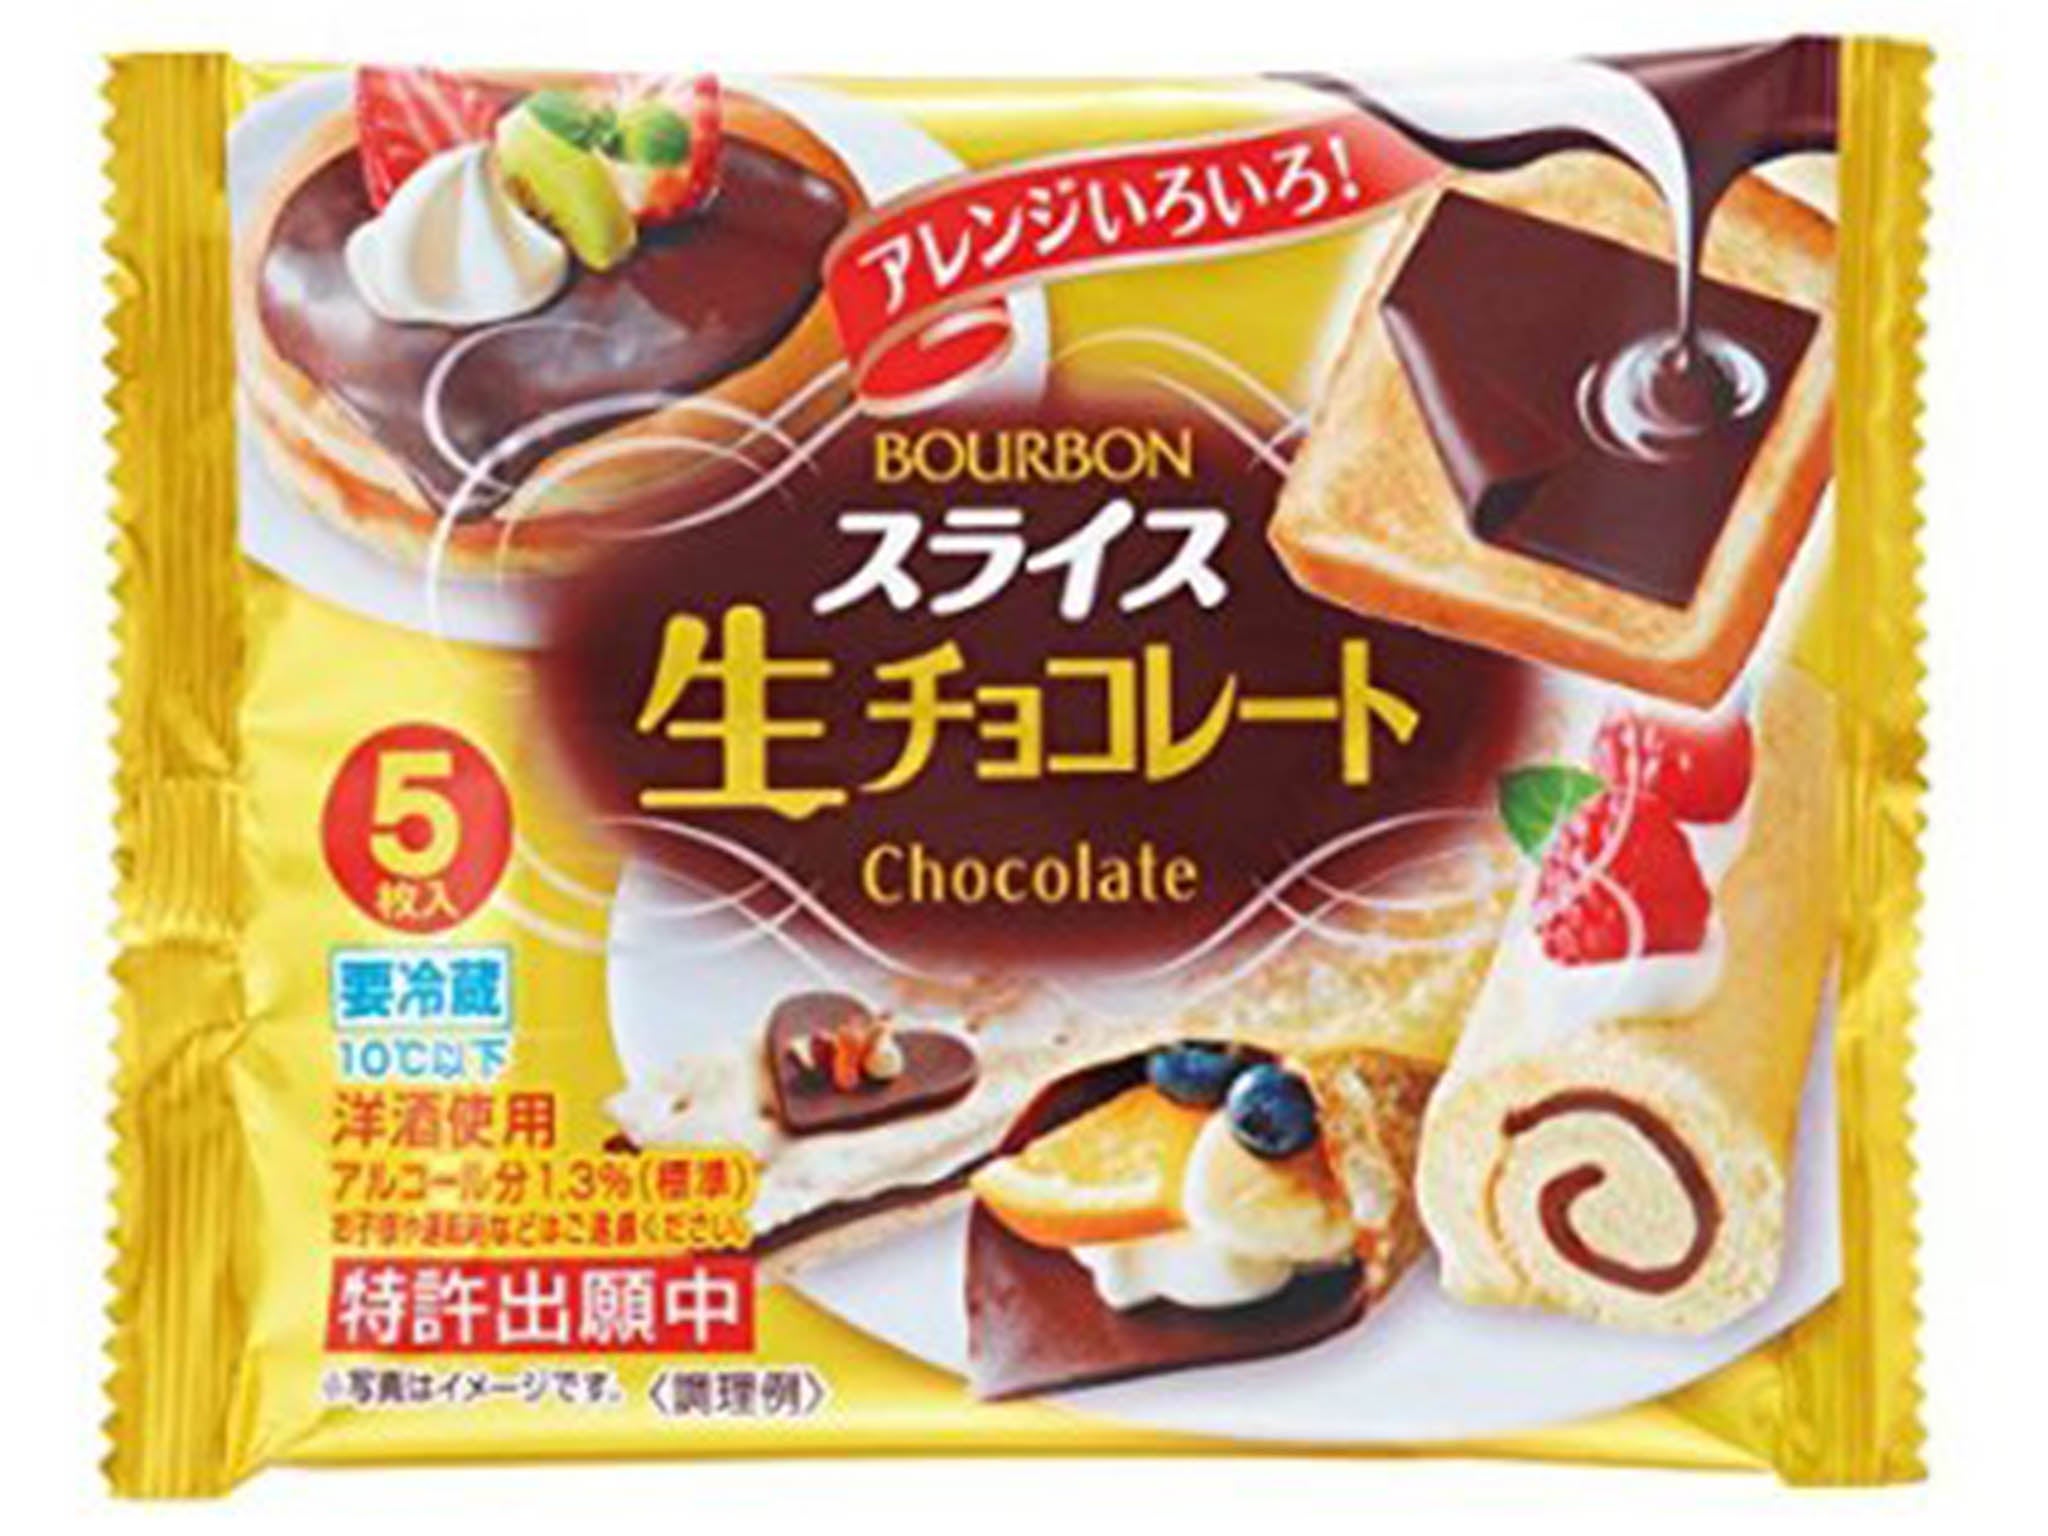 The slices have been made by Japanese chocolatiers Bourbon, and can be bought online